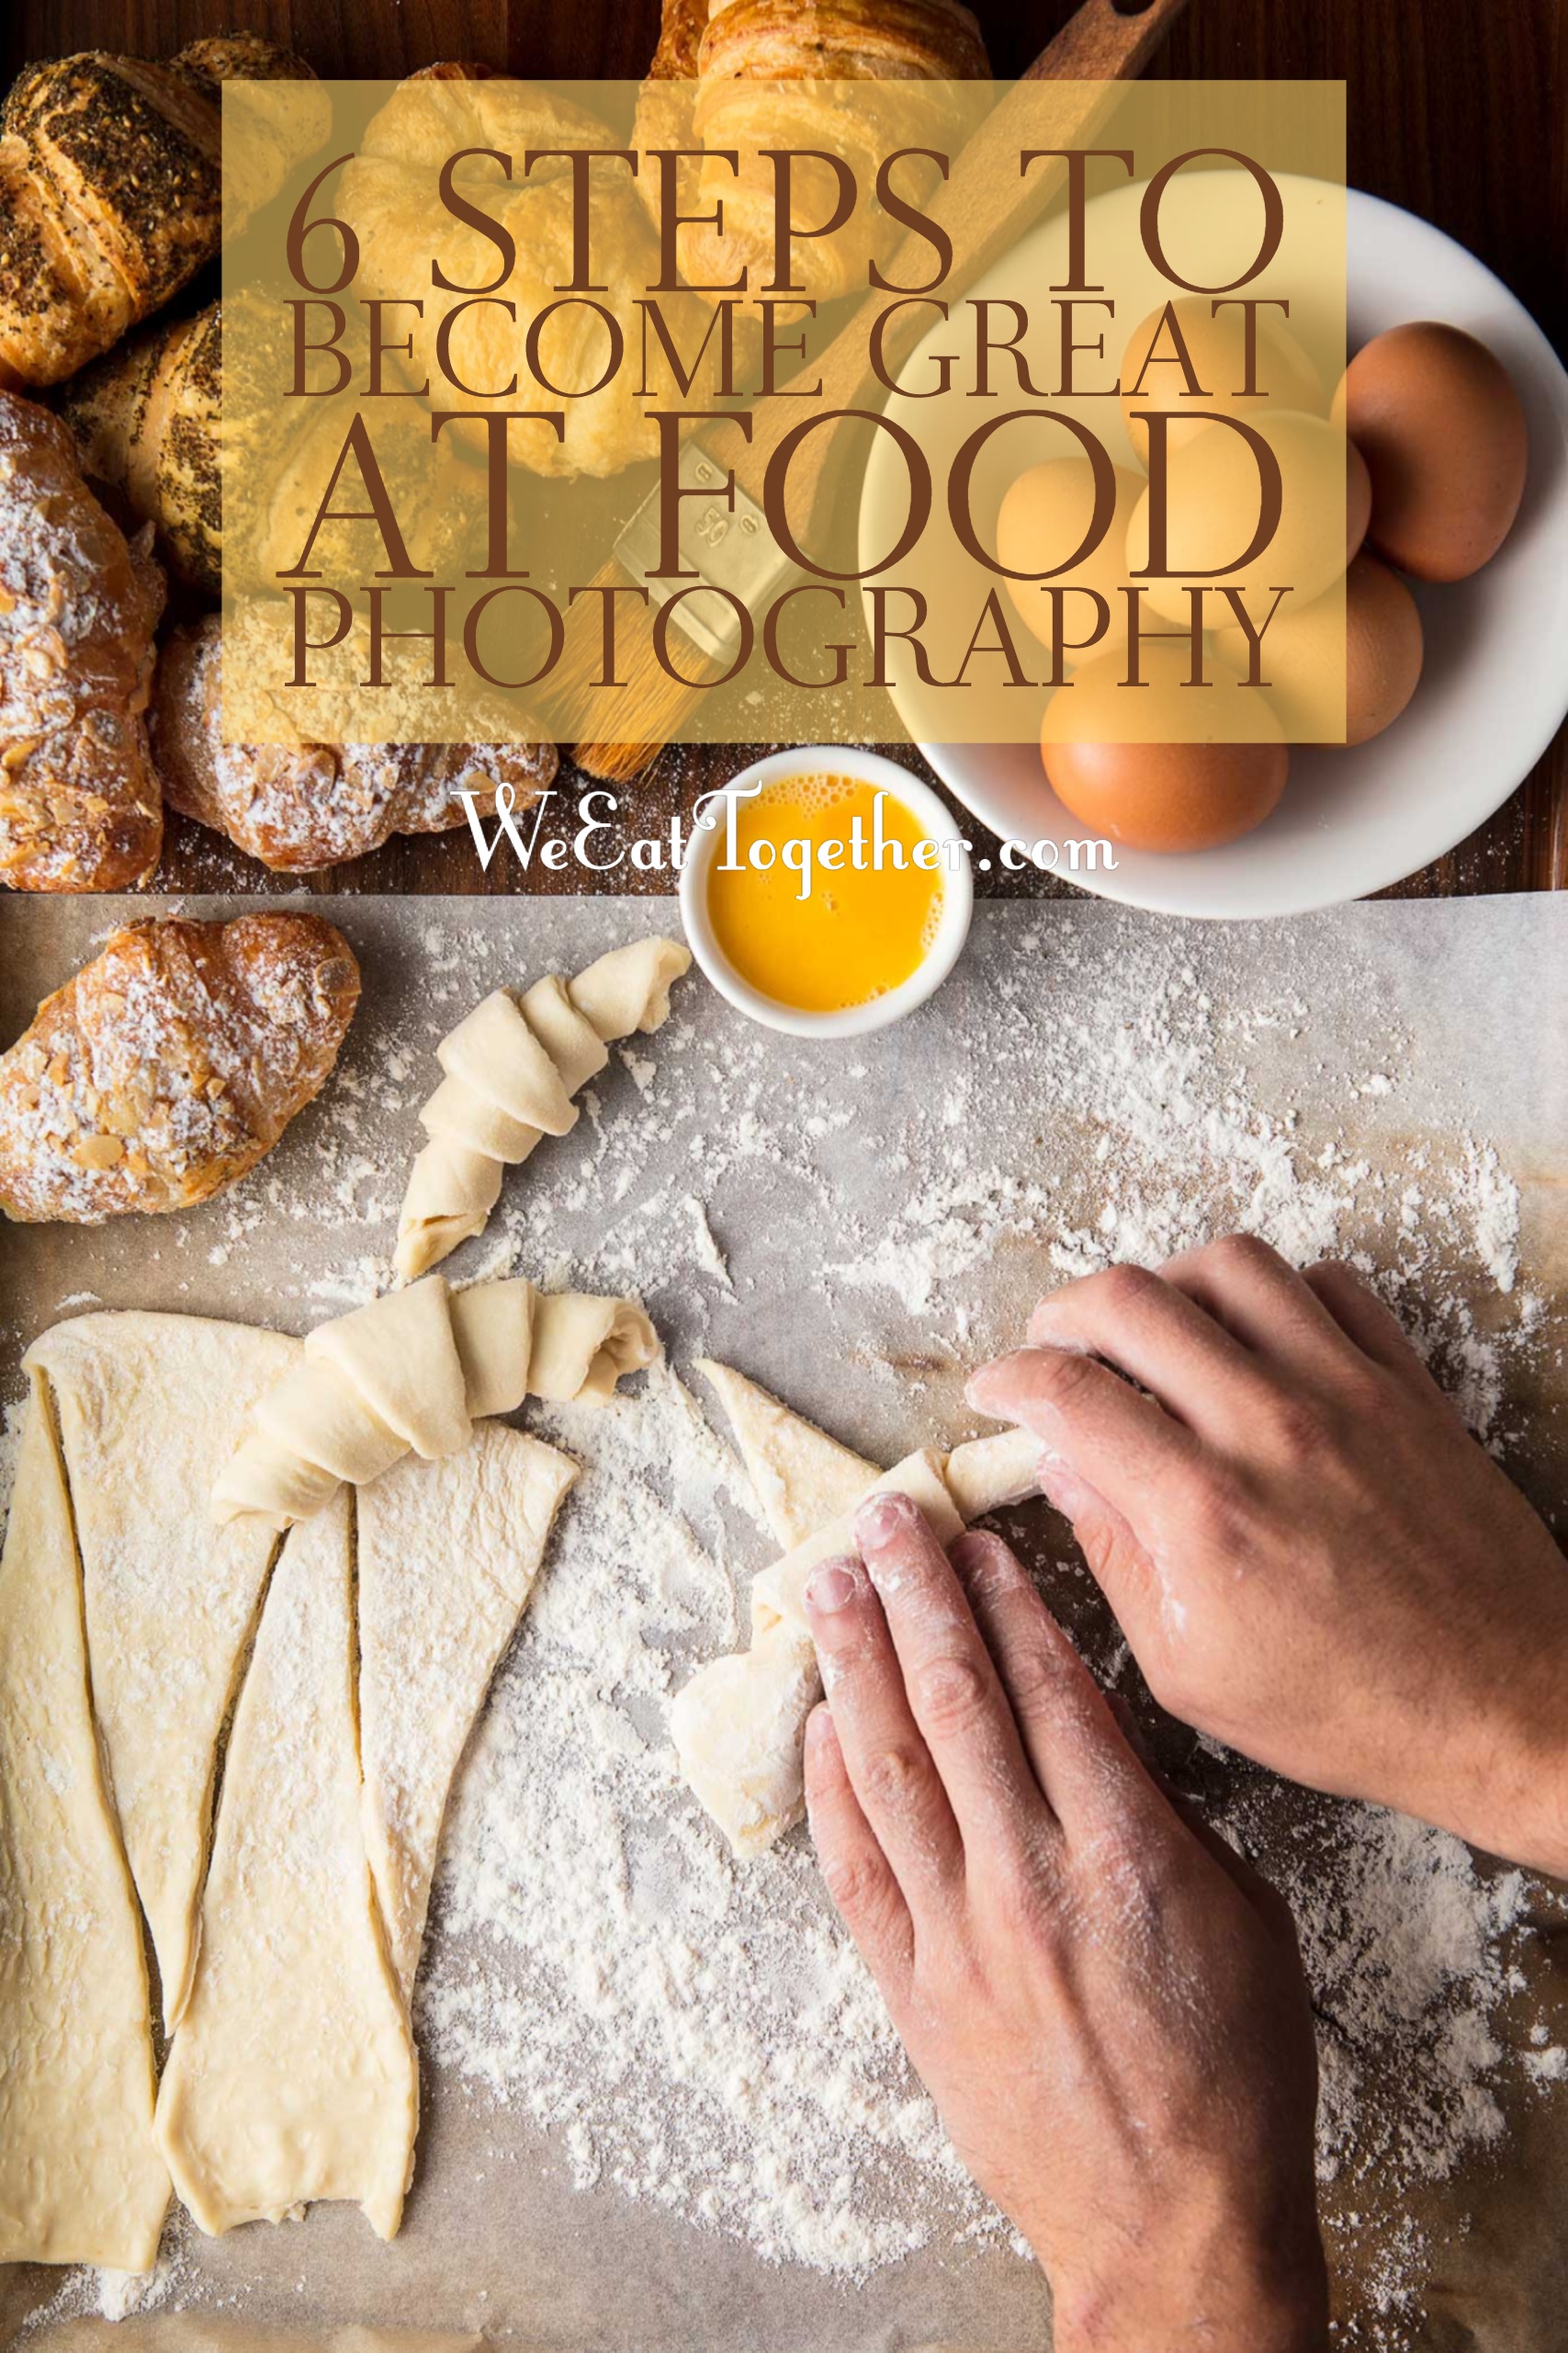 6 Steps To Become Great At Food Photography